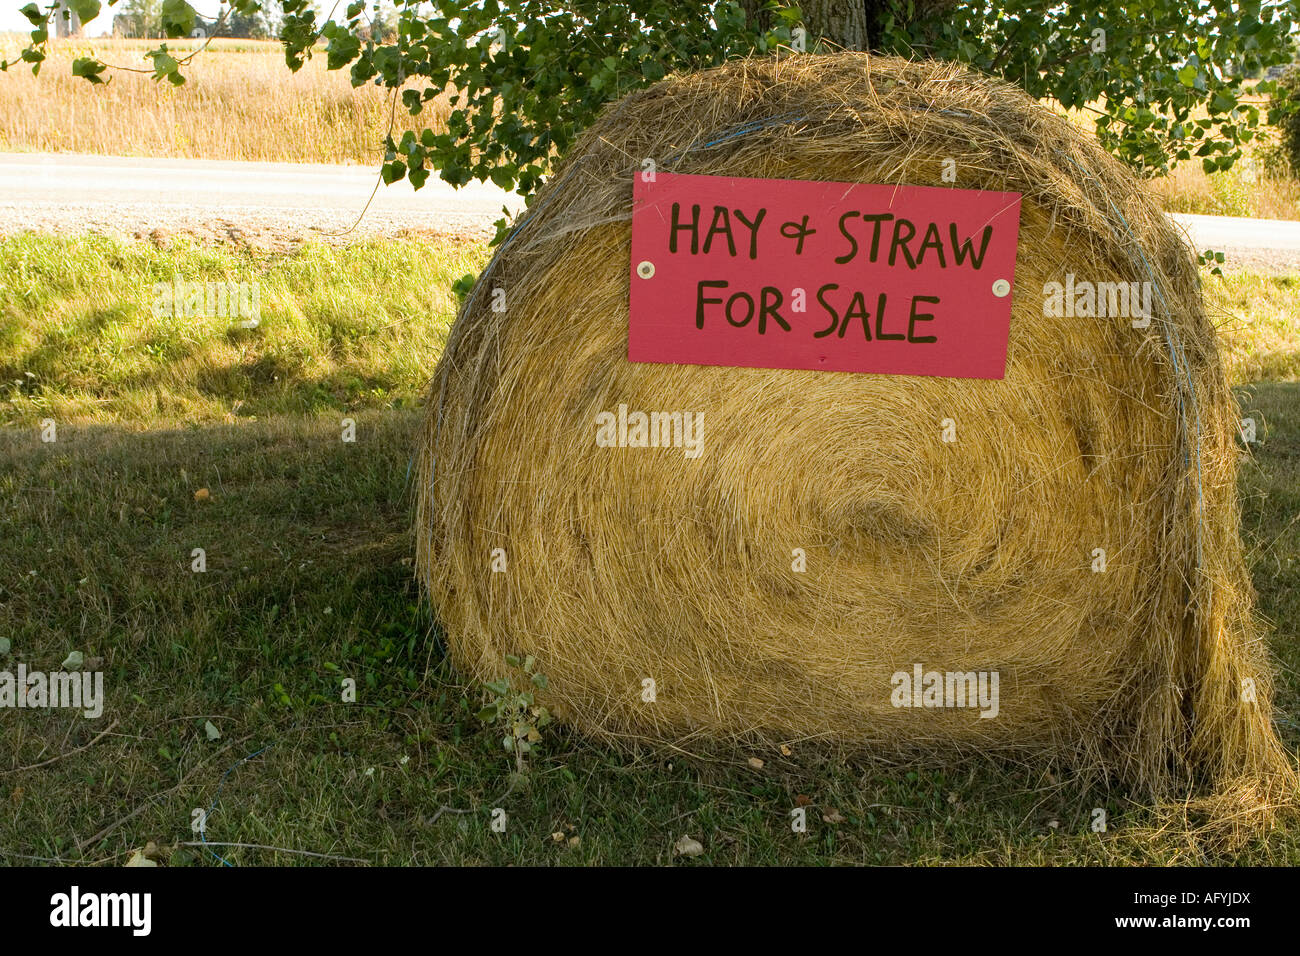 hay and straw for sale, Canada Stock Photo